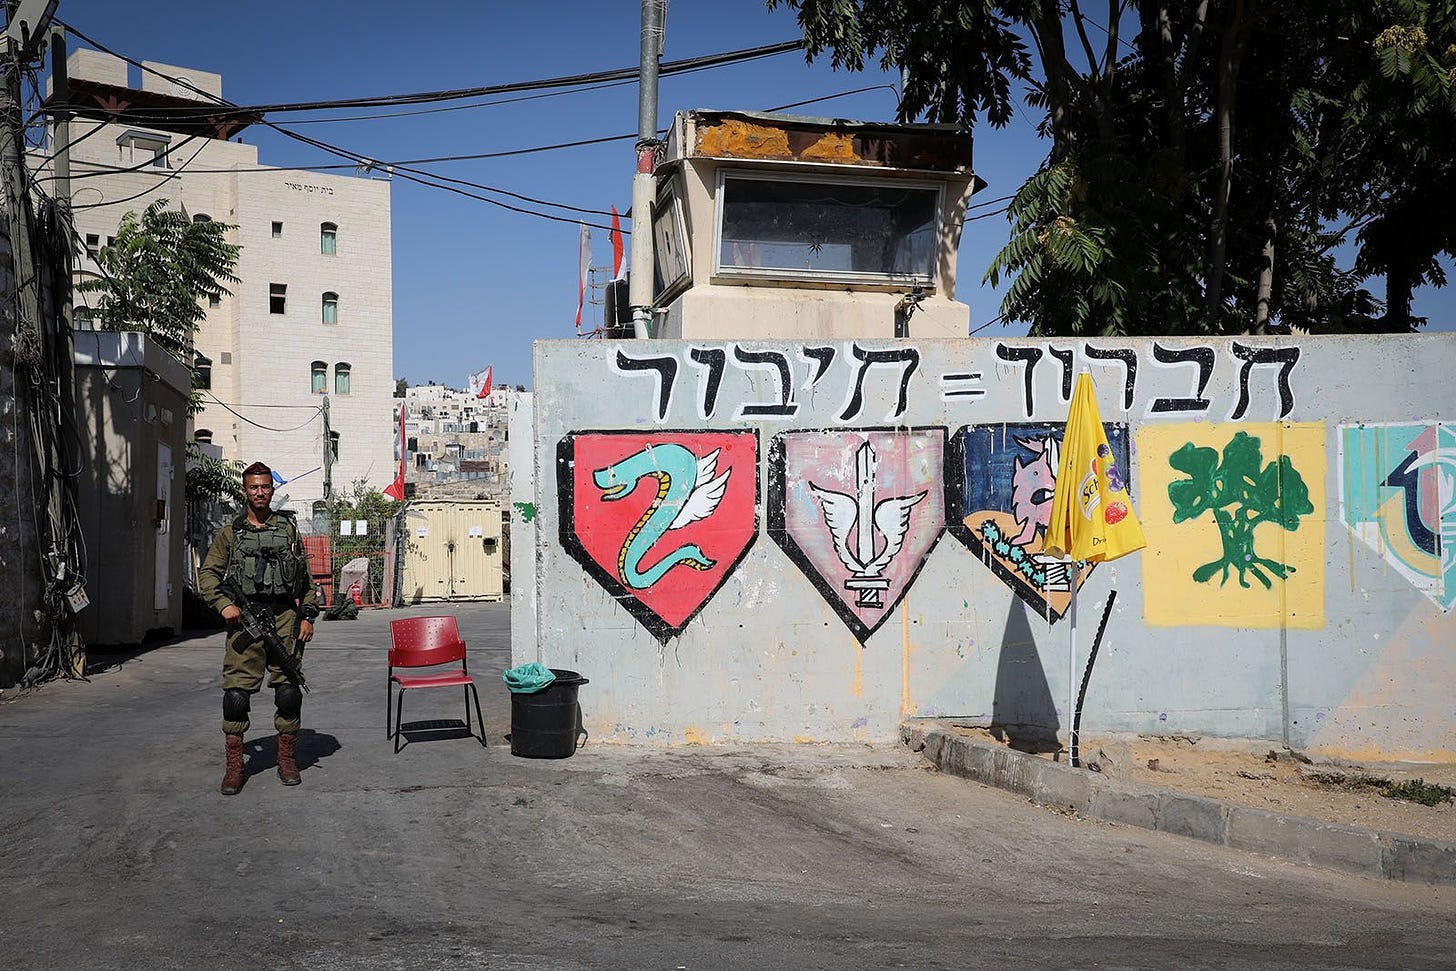 An Israeli soldier stands guard near an IDF base in the divided West Bank city of Hebron. September 4, 2019. (Photo by Gershon Elinson/Flash90)